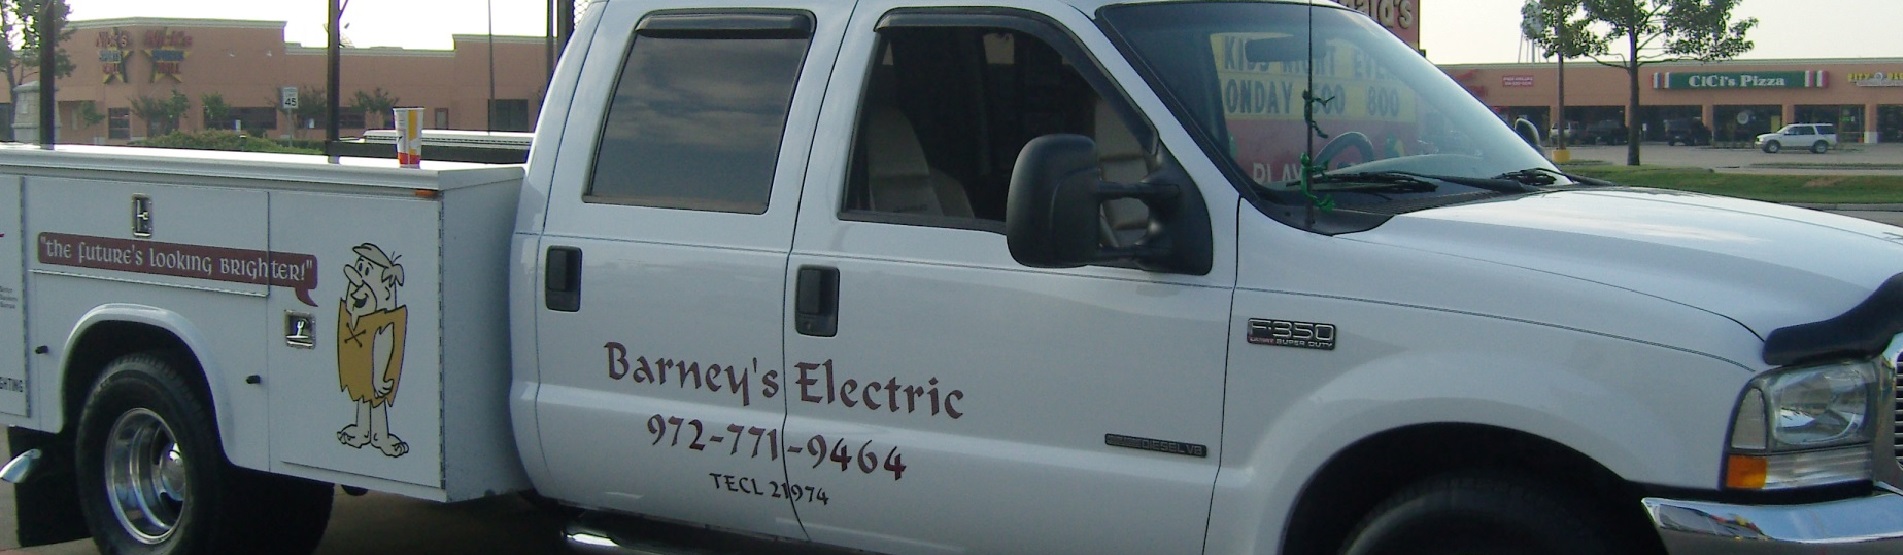 Electrician Sachse TX Barney's Electric Full Service Electrician Residential Commercial Retail and New Construction Wiring Repair Installation Service 24 Hour Emergency Services Master Electrician Rockwall Texas